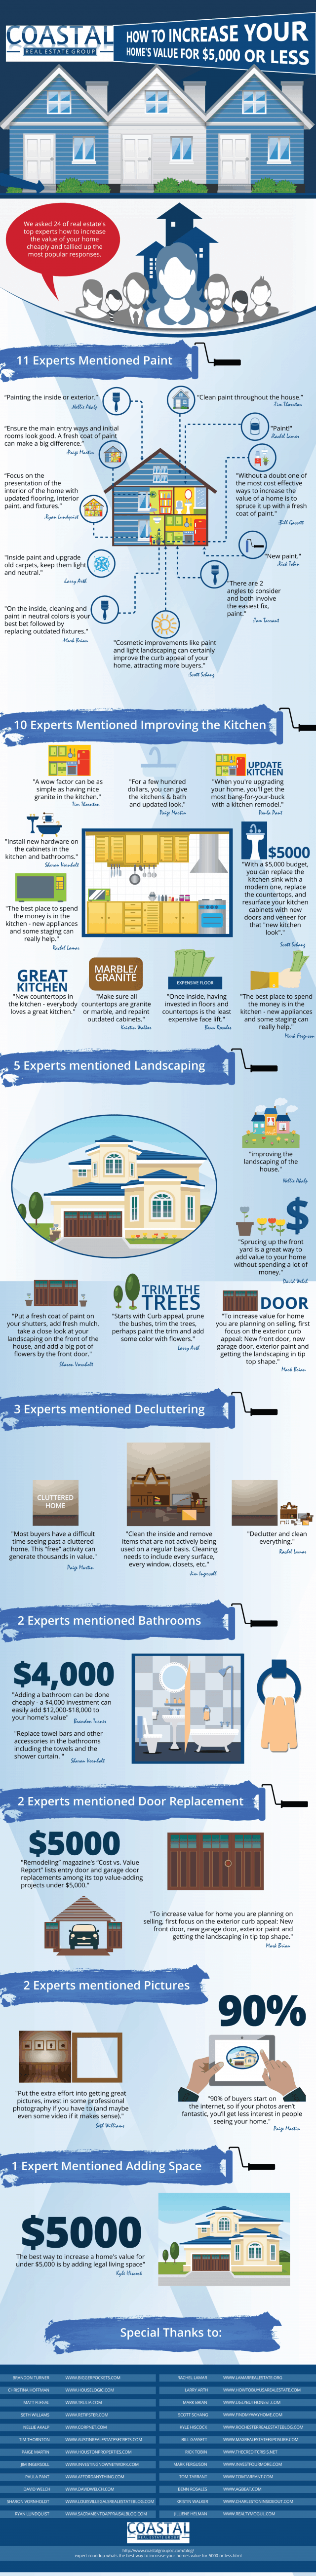 Best Ways To Increase Home Value Infographic